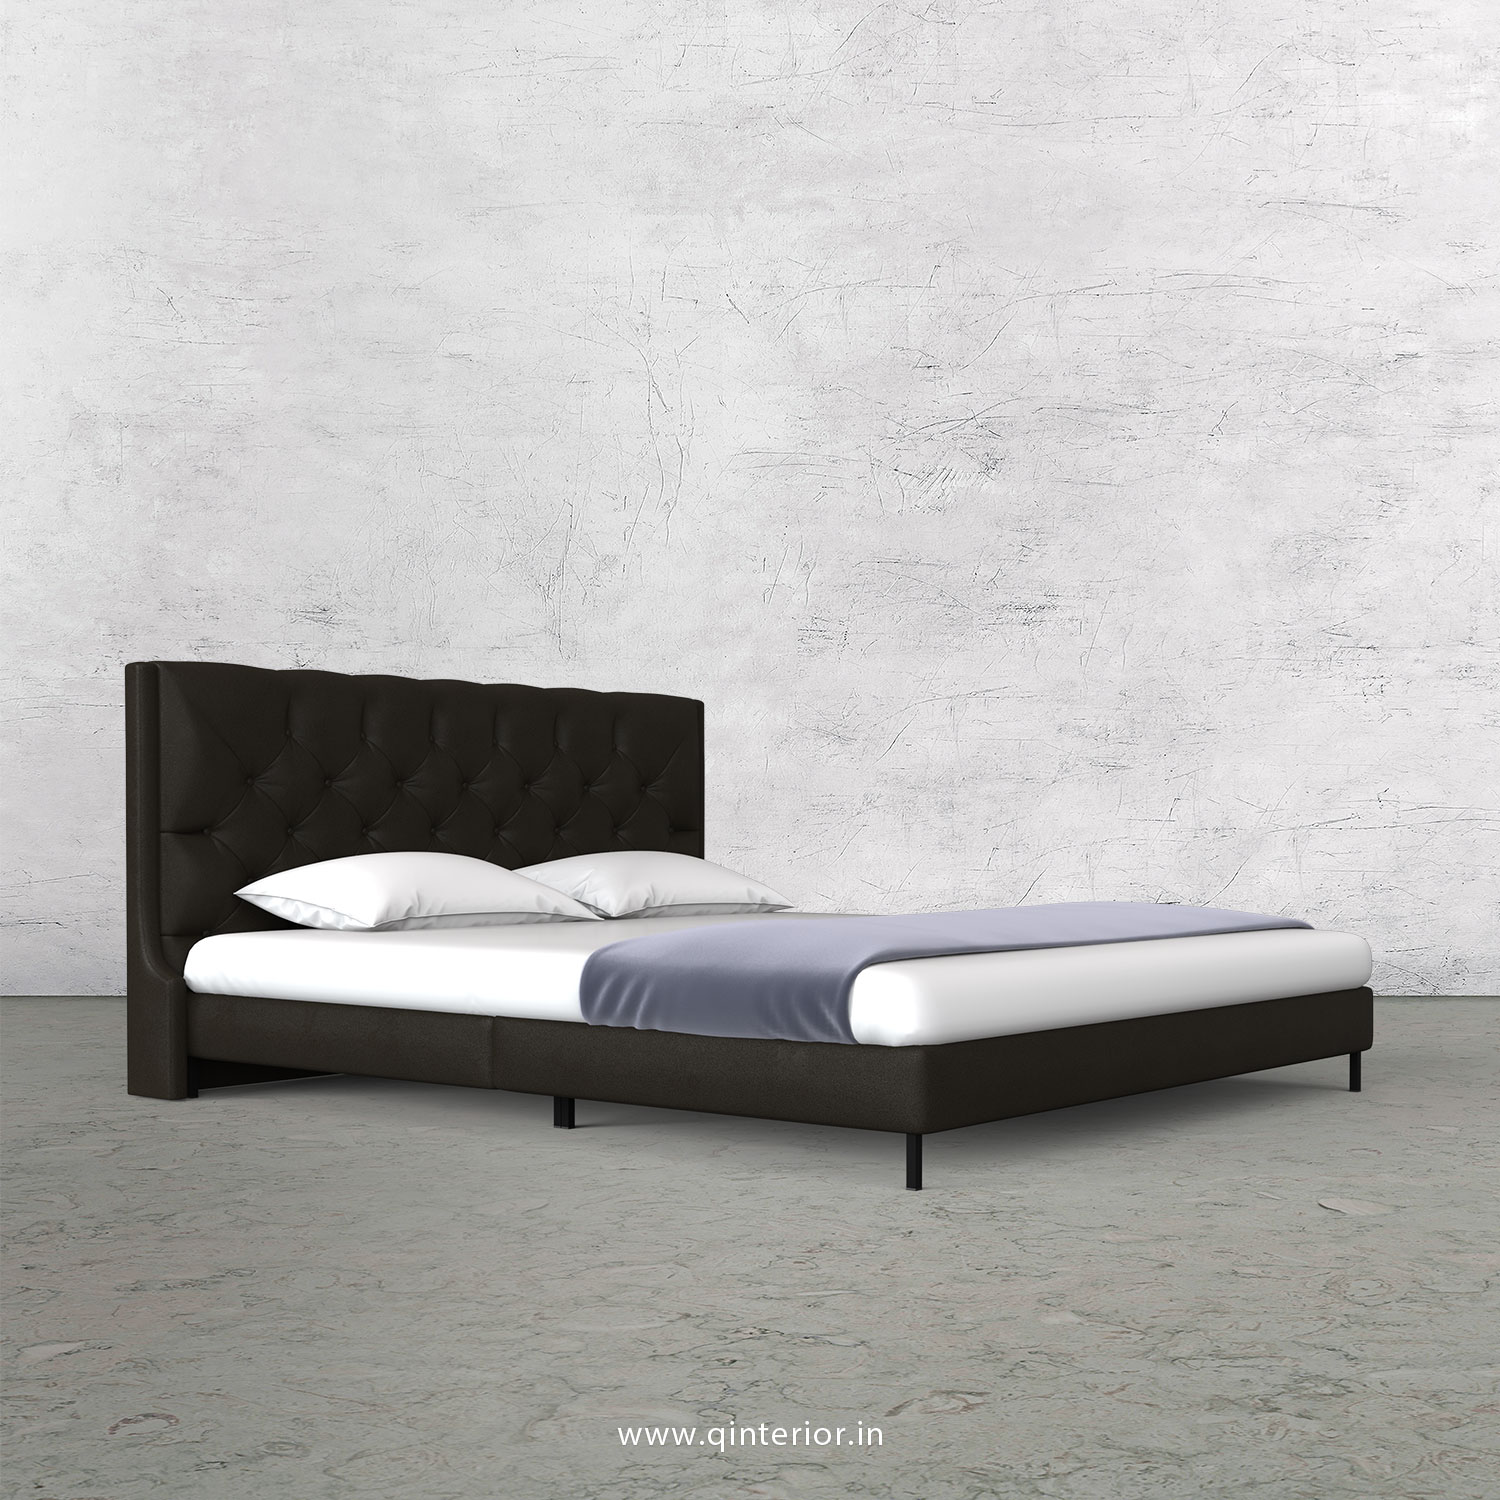 Scorpius King Size Bed in Fab Leather Fabric - KBD003 FL11